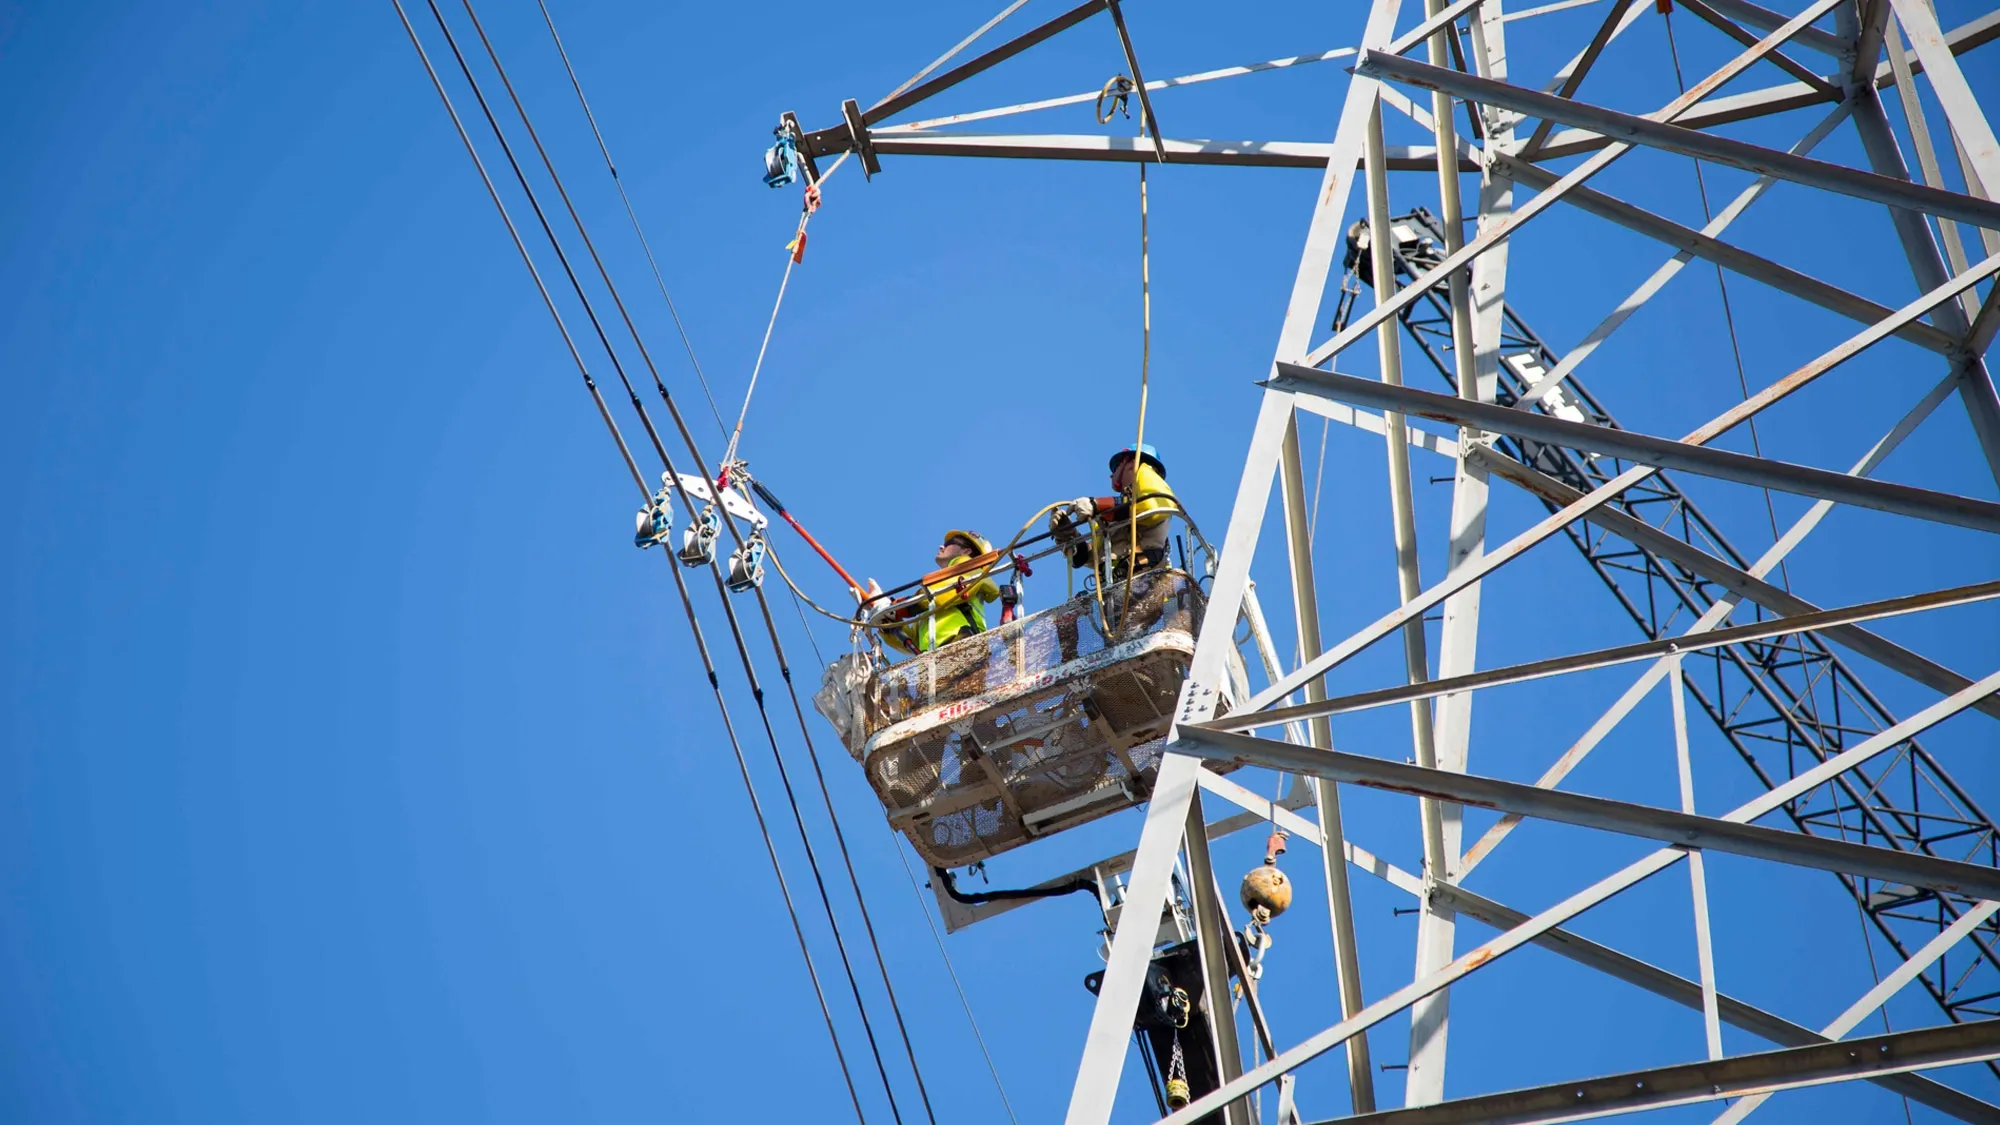 Workers in a bucket from a bucket truck working on transmission lines